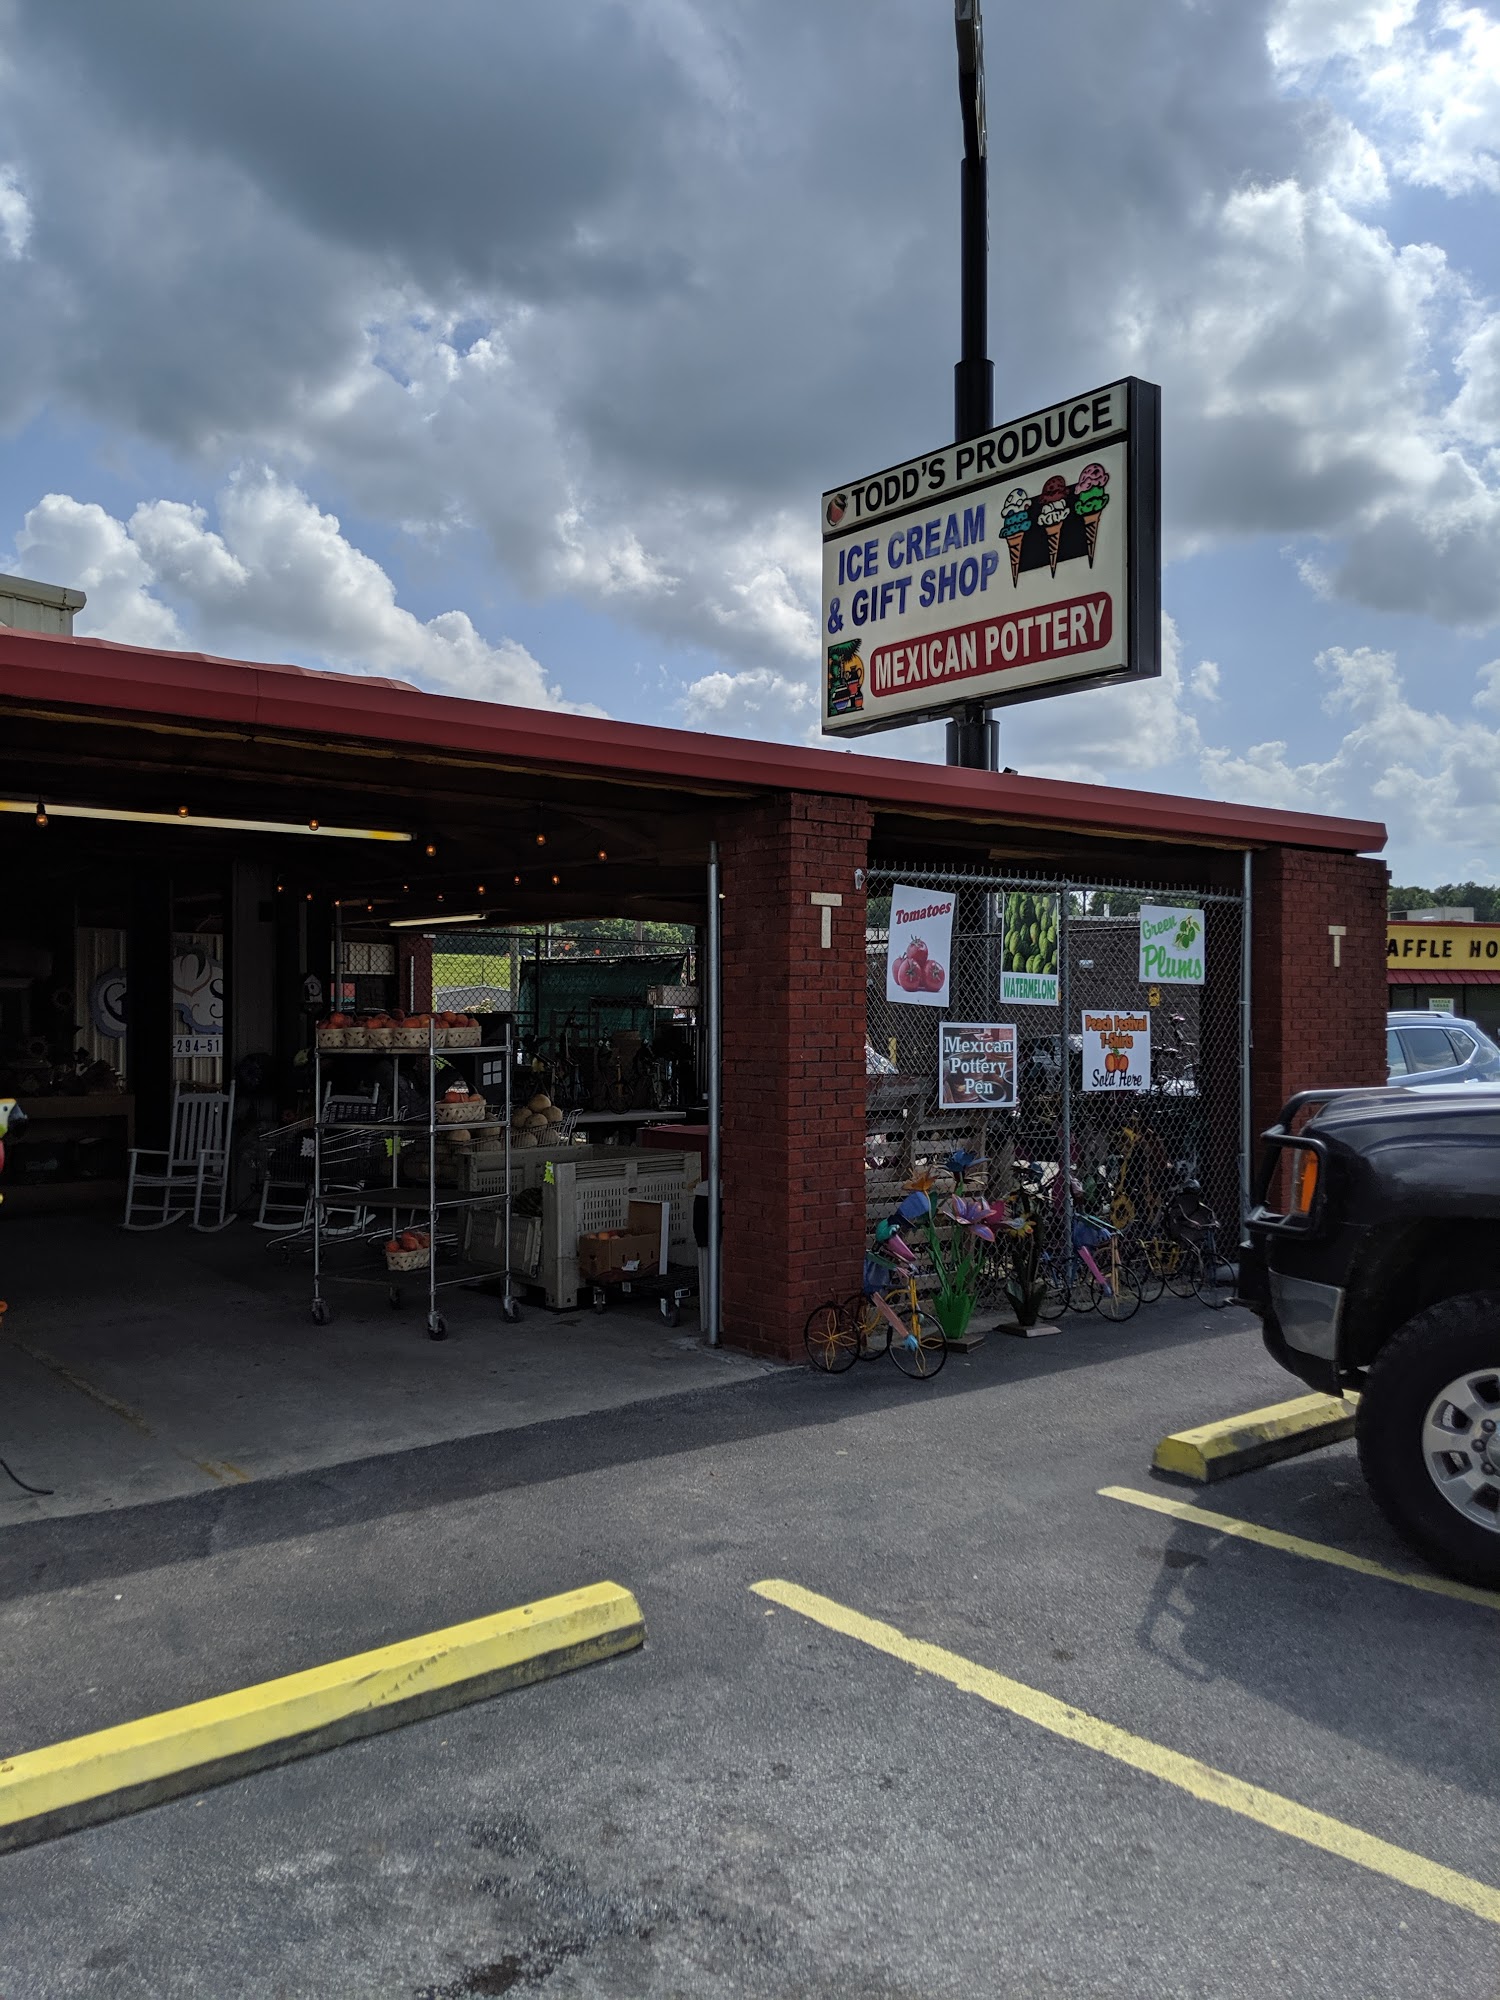 Todd's Produce & Gift Shop